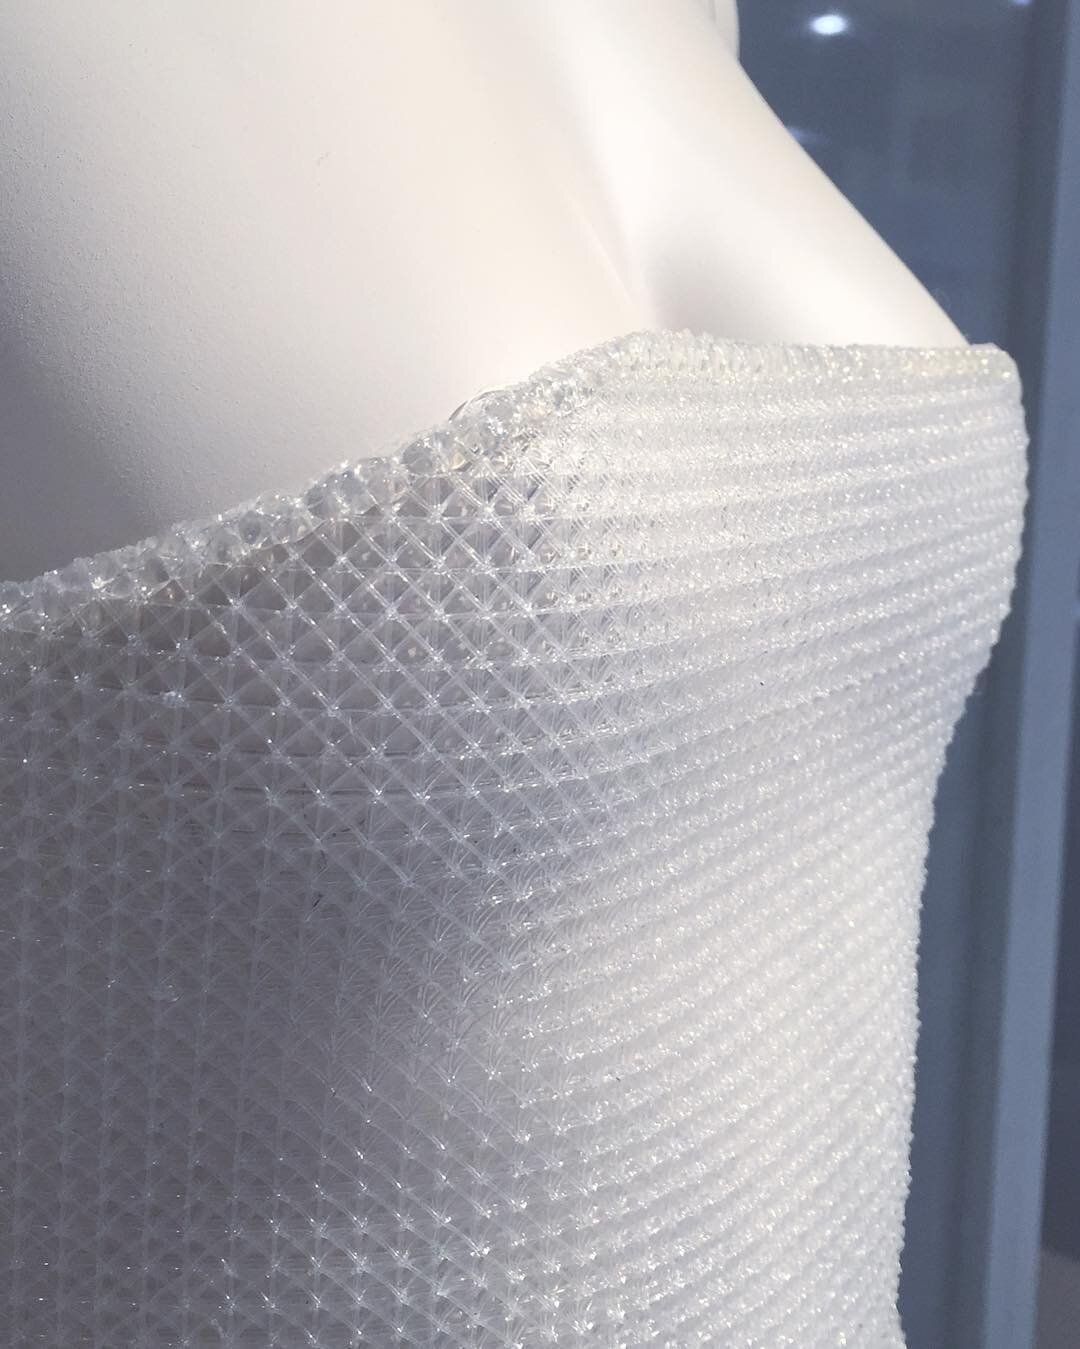 The 3D printed bodysuit on display in the WHISPERINGS forum at @interfiliere in collaboration with #conceptsparis @jos.berry #interfiliere